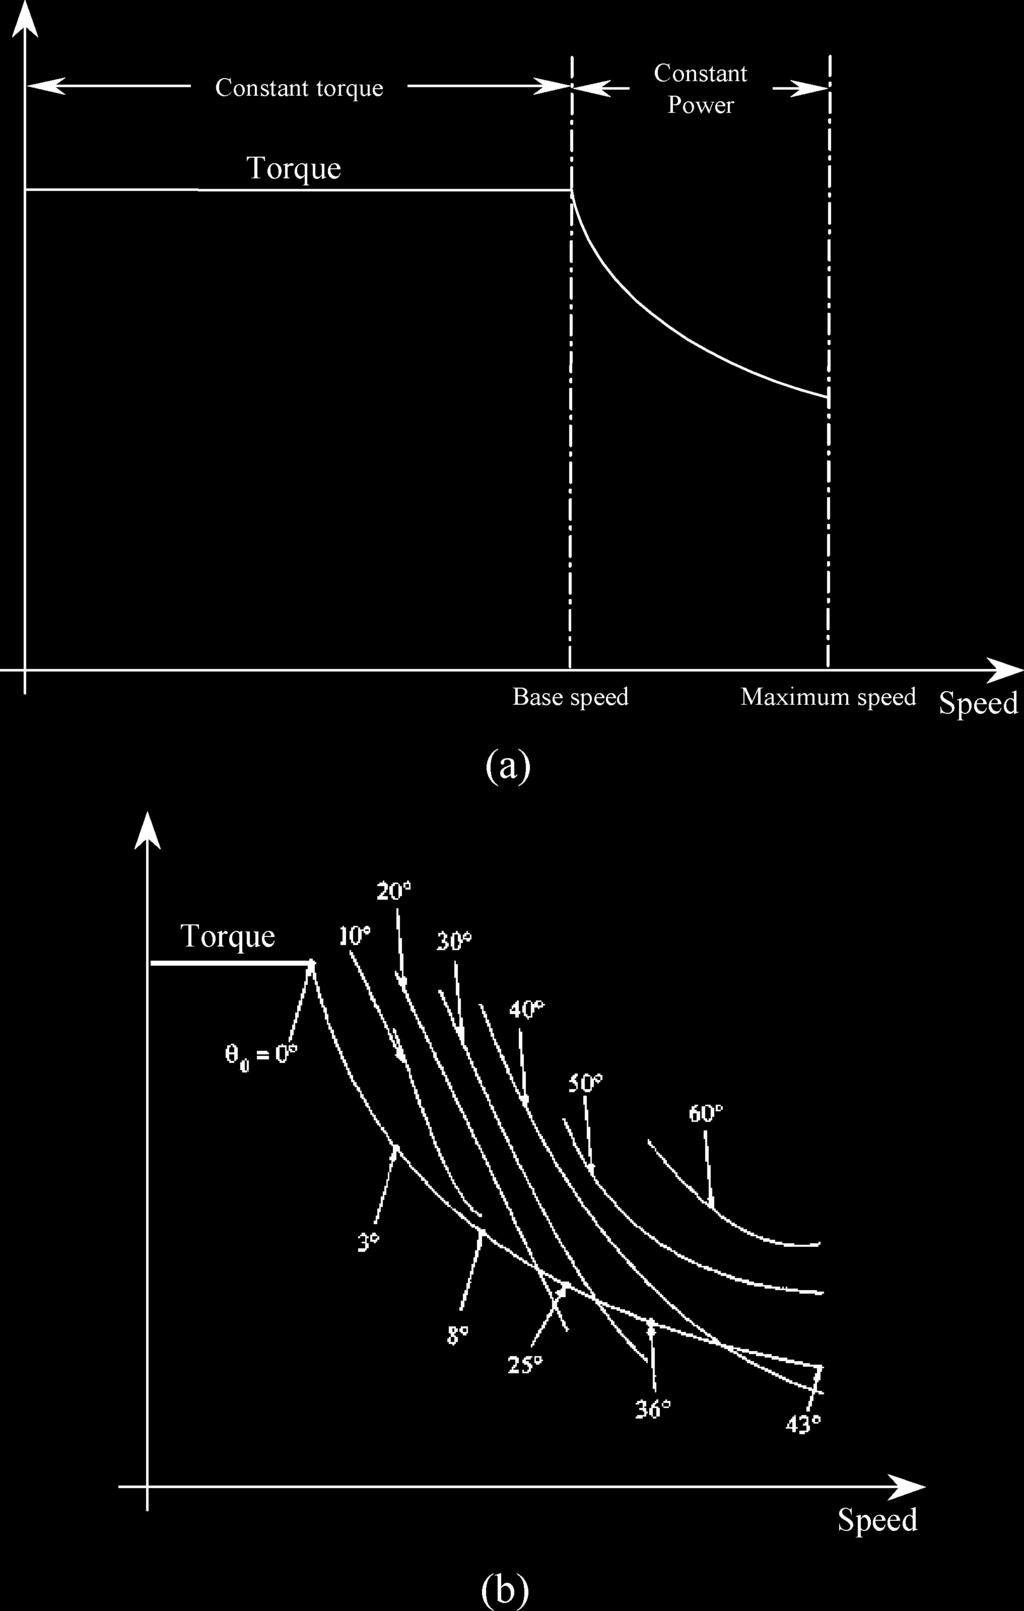 1760 IEEE TRANSACTIONS ON VEHICULAR TECHNOLOGY, VOL. 55, NO. 6, NOVEMBER 2006 Fig. 12. Torque speed characteristic of a PM brushless drive. (a) Typical characteristic.